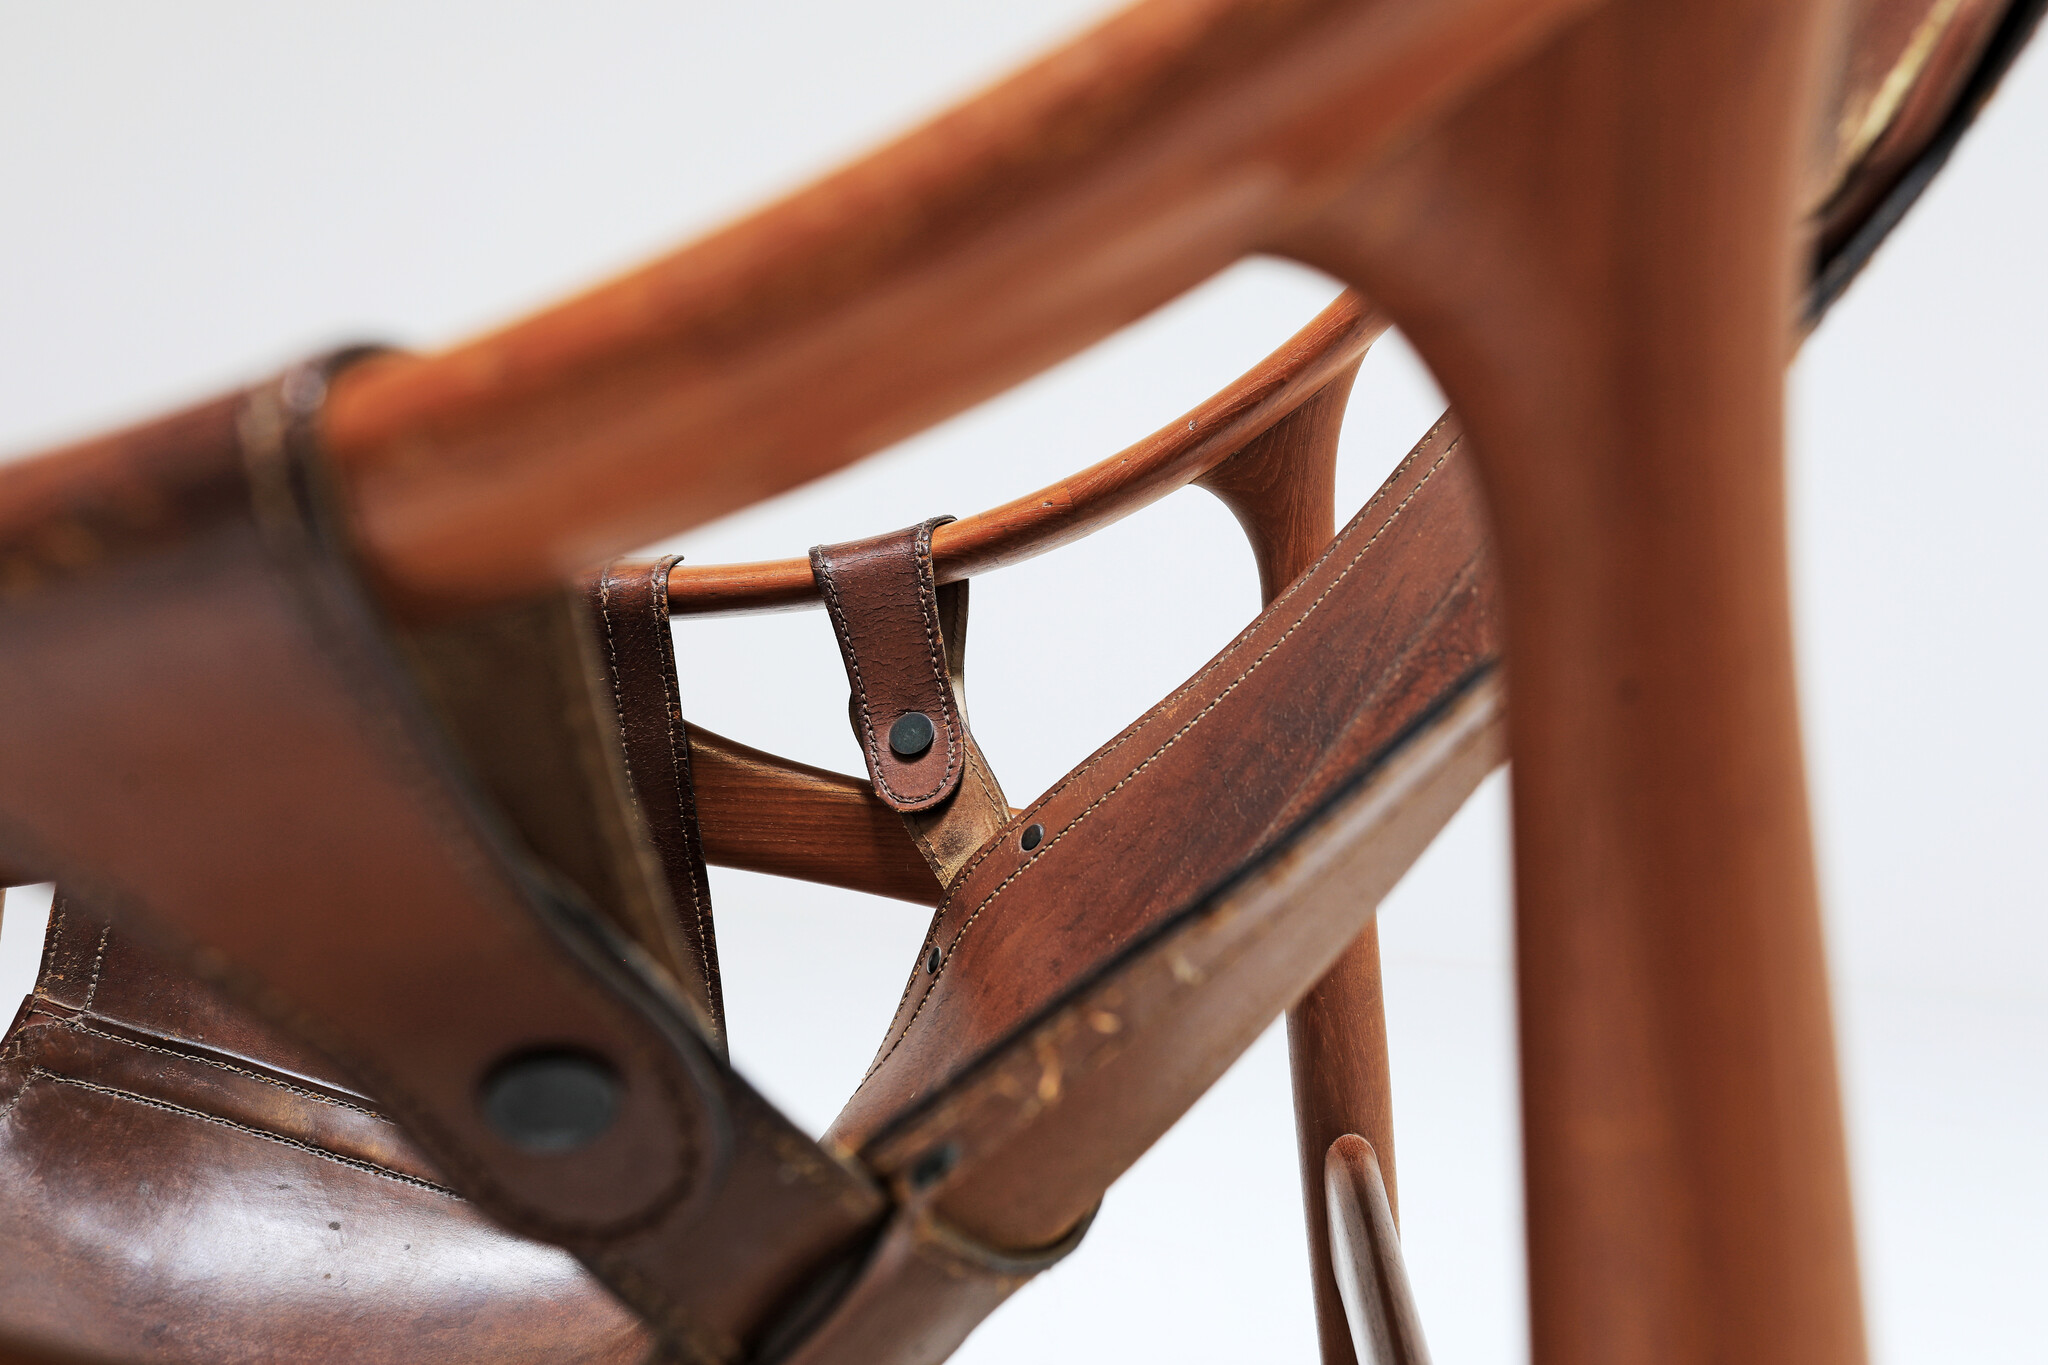 Leather chair from Liceu de Artes e Ofícios from the 1960s